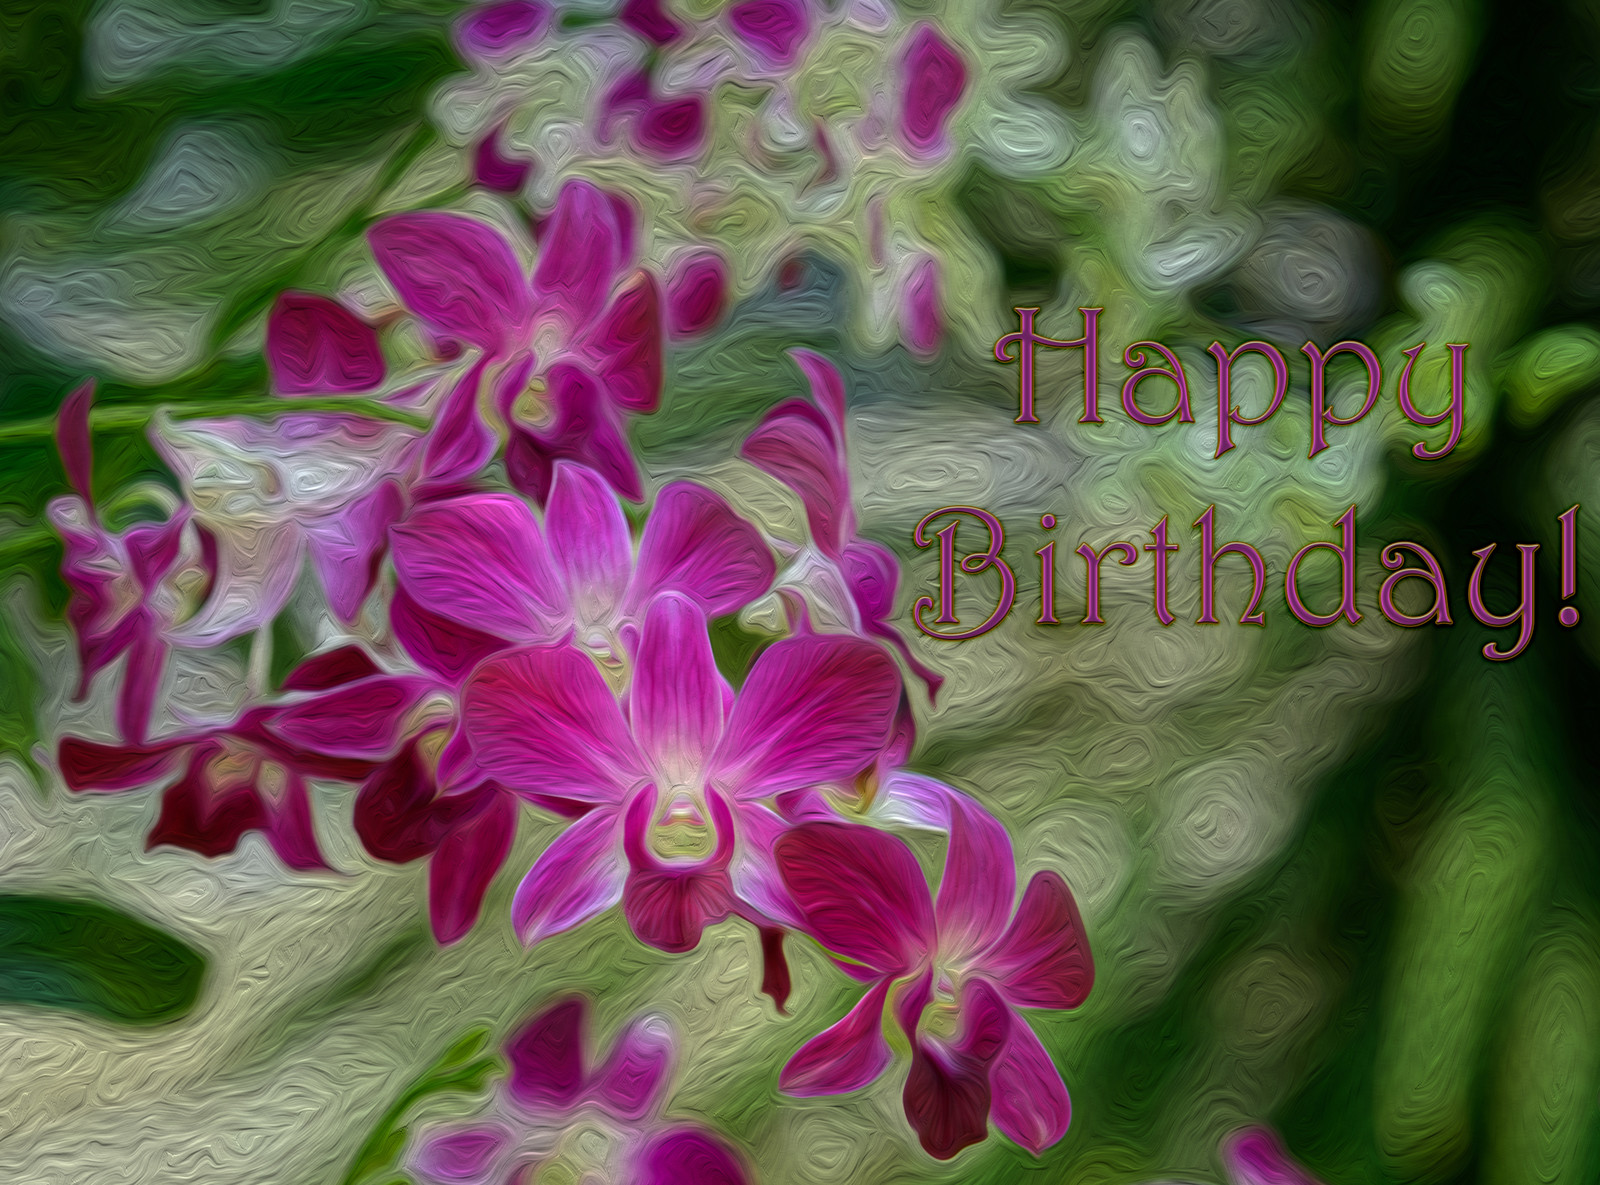 Happy birthday orchids greeting cardub gallery yopriceville